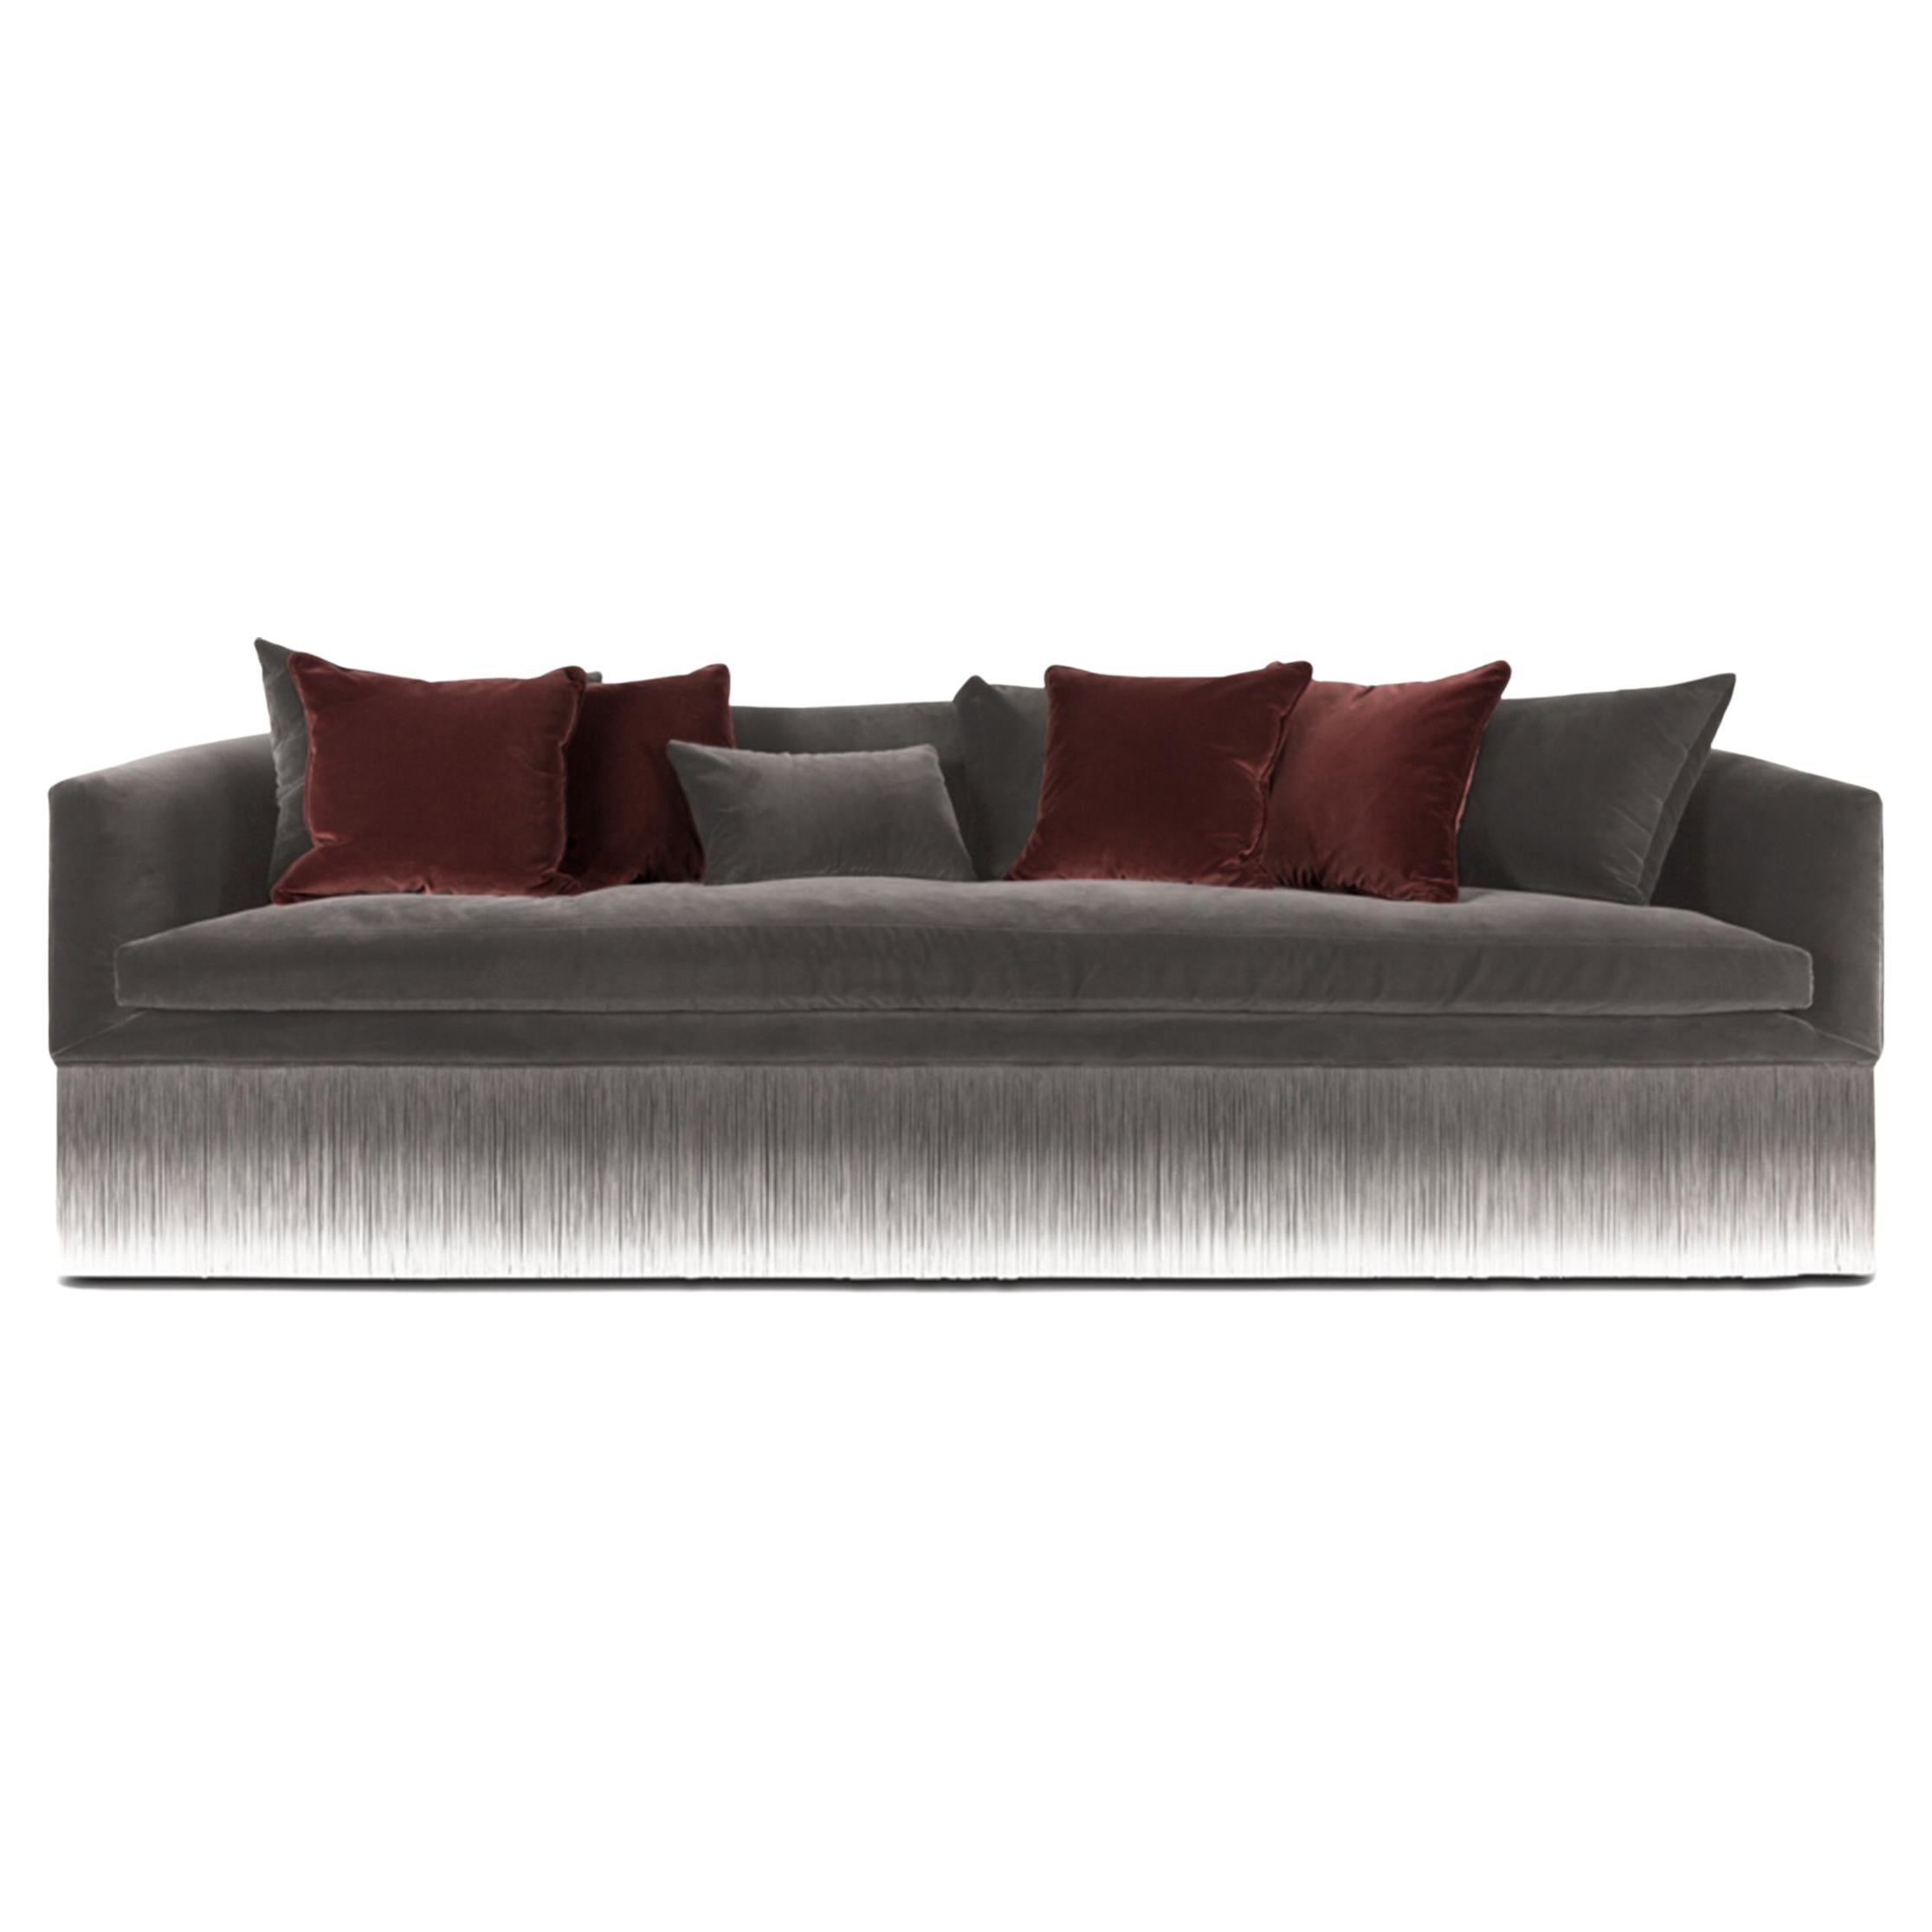 Moooi Amami Sofa with Fringes in Light Grey Upholstery by Lorenza Bozzoli For Sale